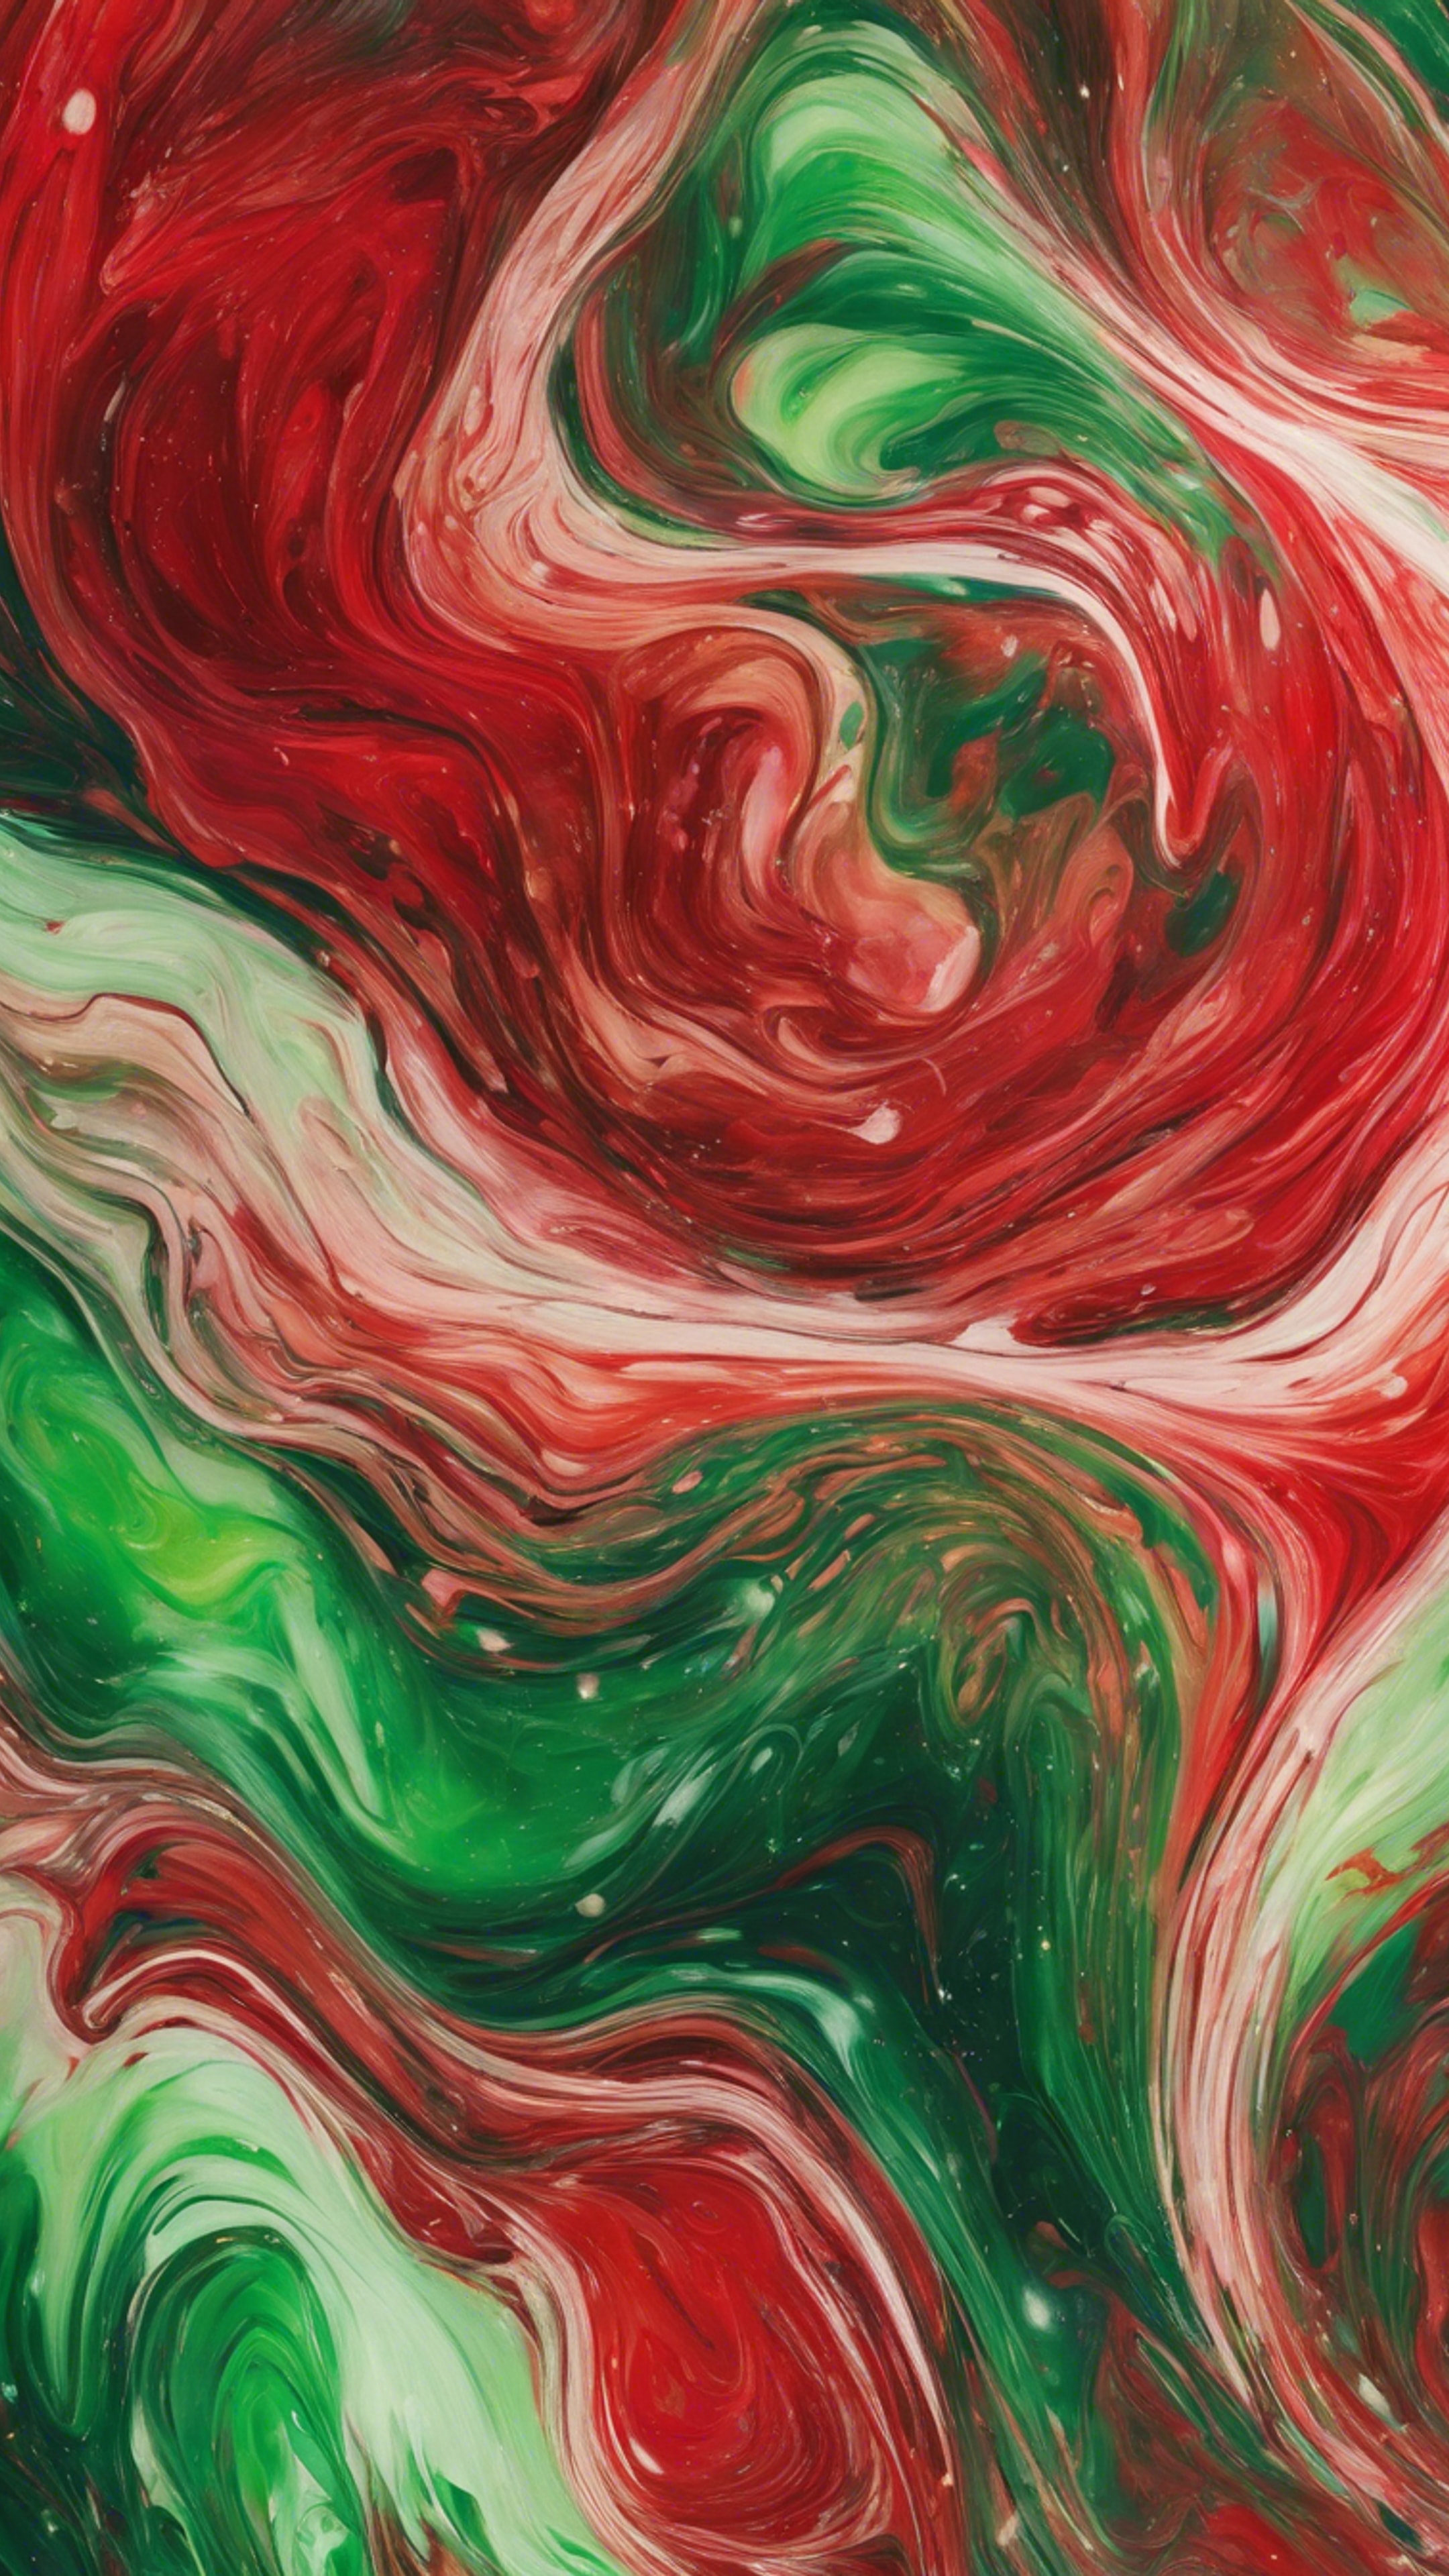 A vivid painting of swirling red and green abstract patterns壁紙[5978fc4bccef4bcc8a58]